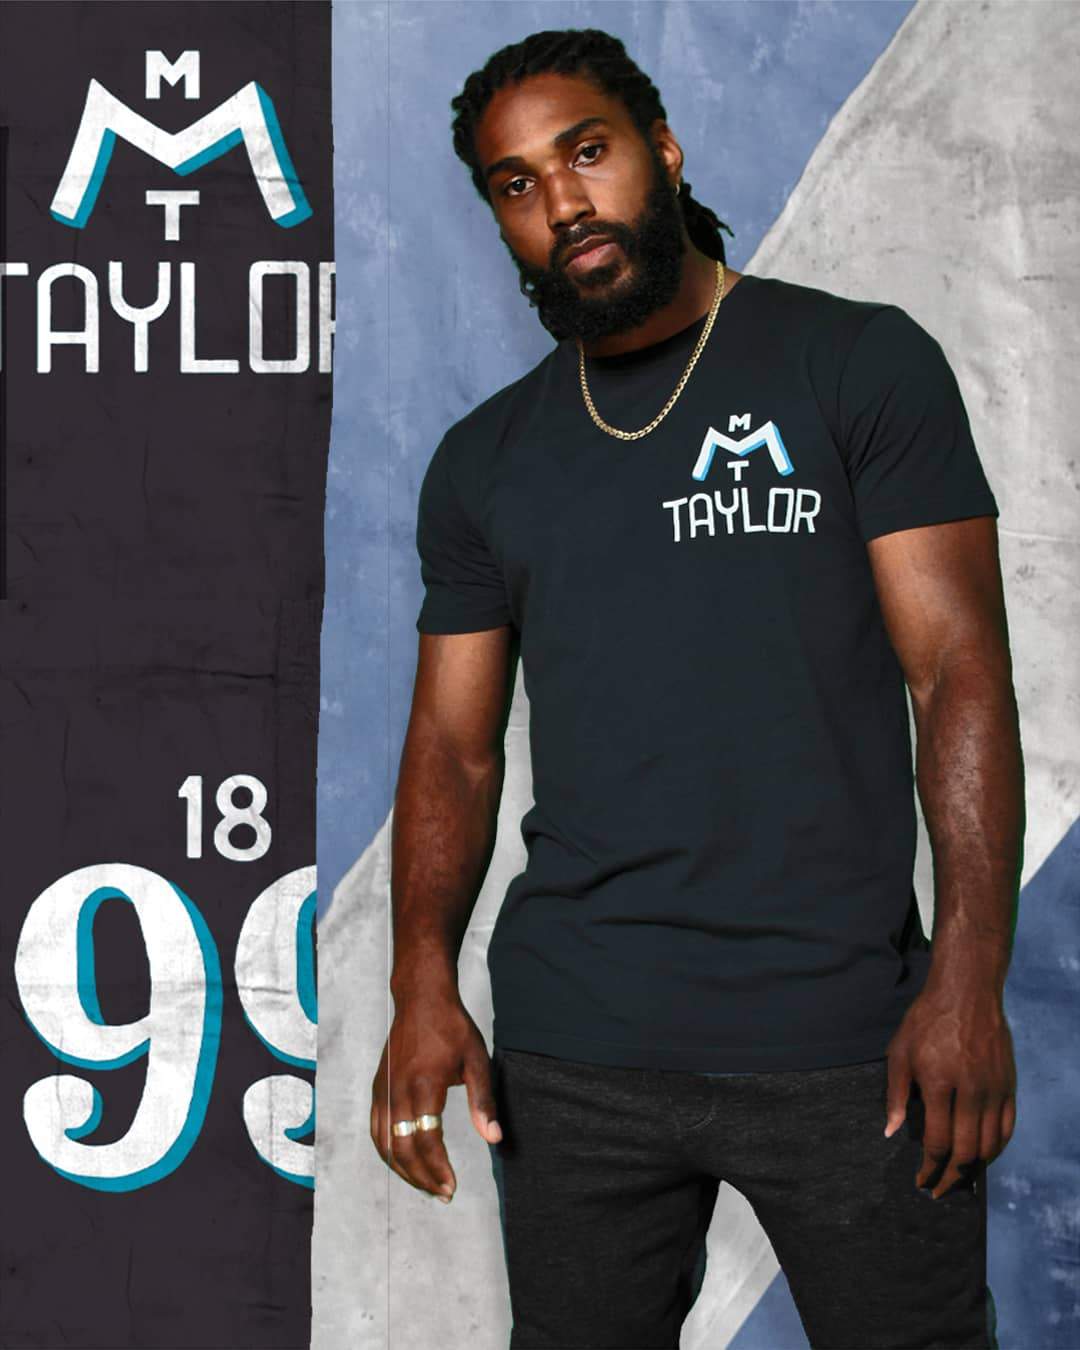 GC/GB - Major Marshall Taylor 1899 Tee - Roots of Fight